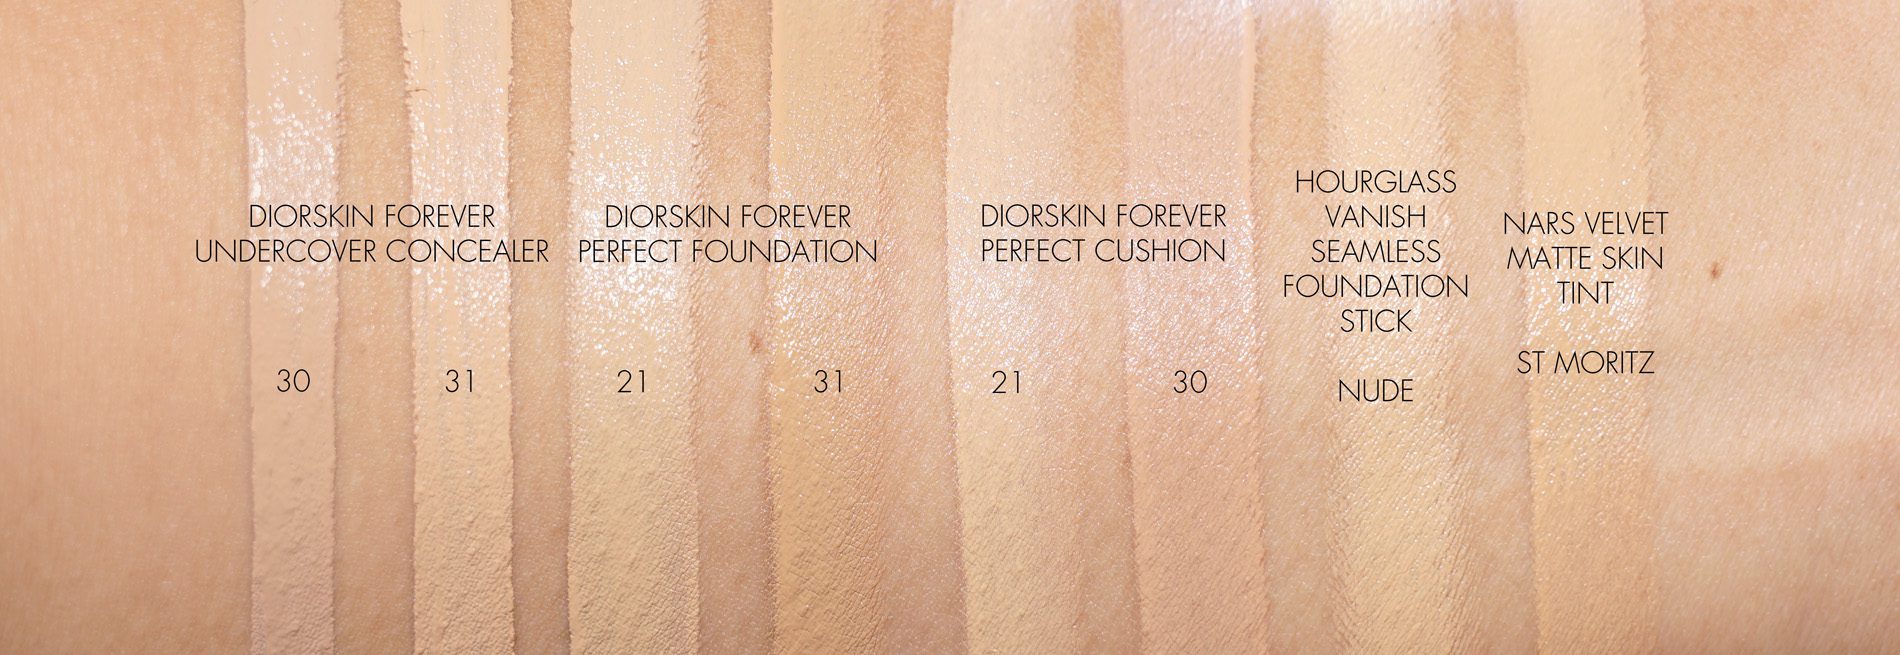 diorskin forever perfect mousse swatches